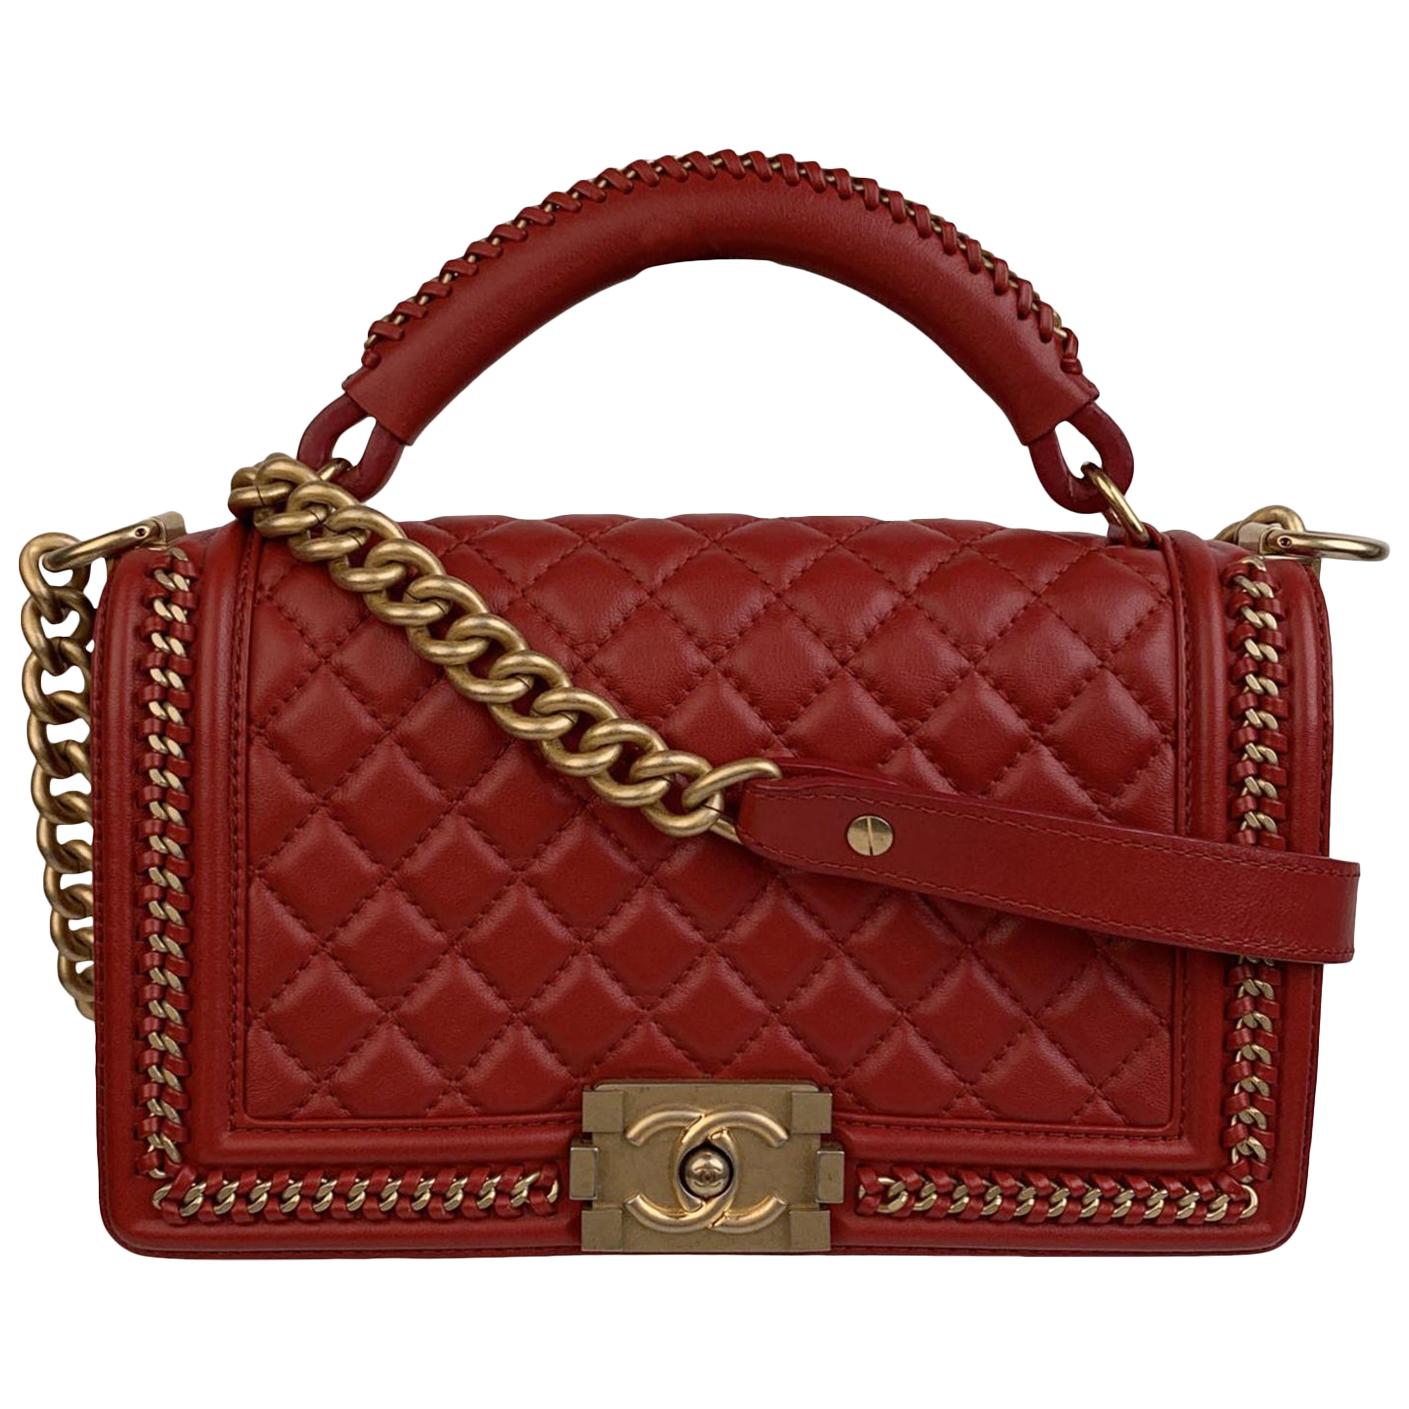 Chanel Red Quilted Leather Top Handle Medium Boy Bag with Chains